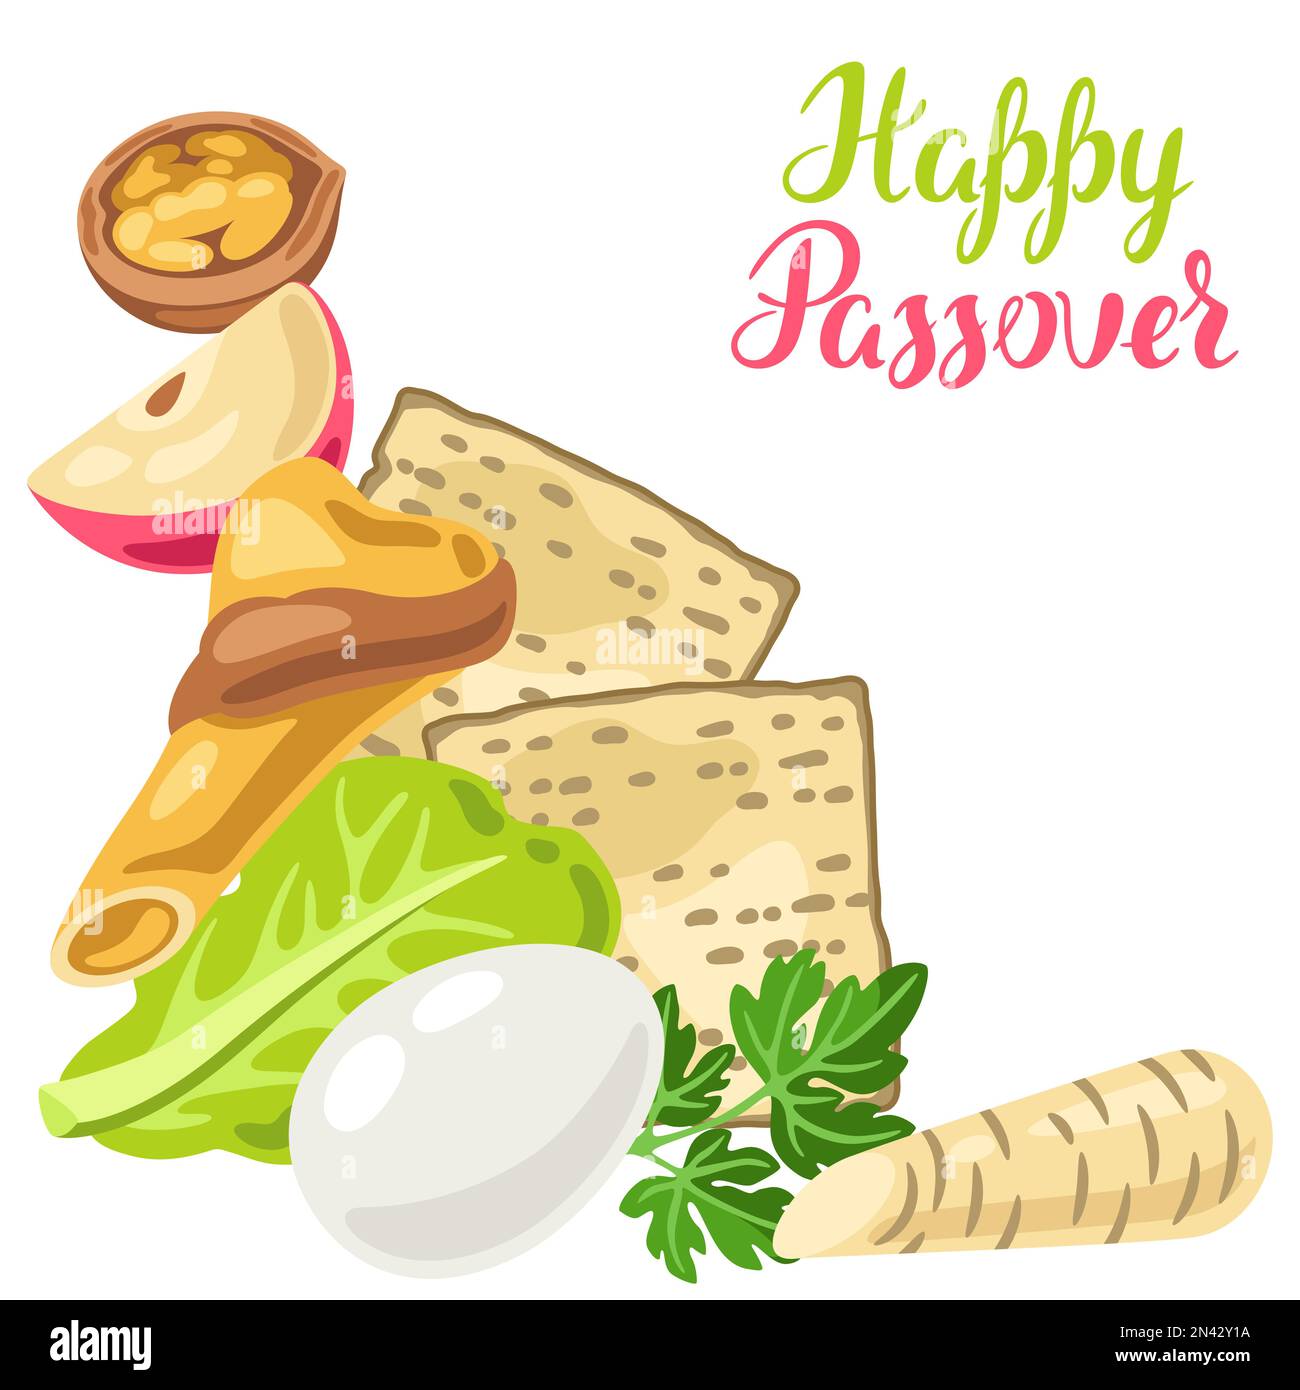 Happy Pesach Jewish Passover plate greeting card. Holiday background with traditional symbols. Stock Vector